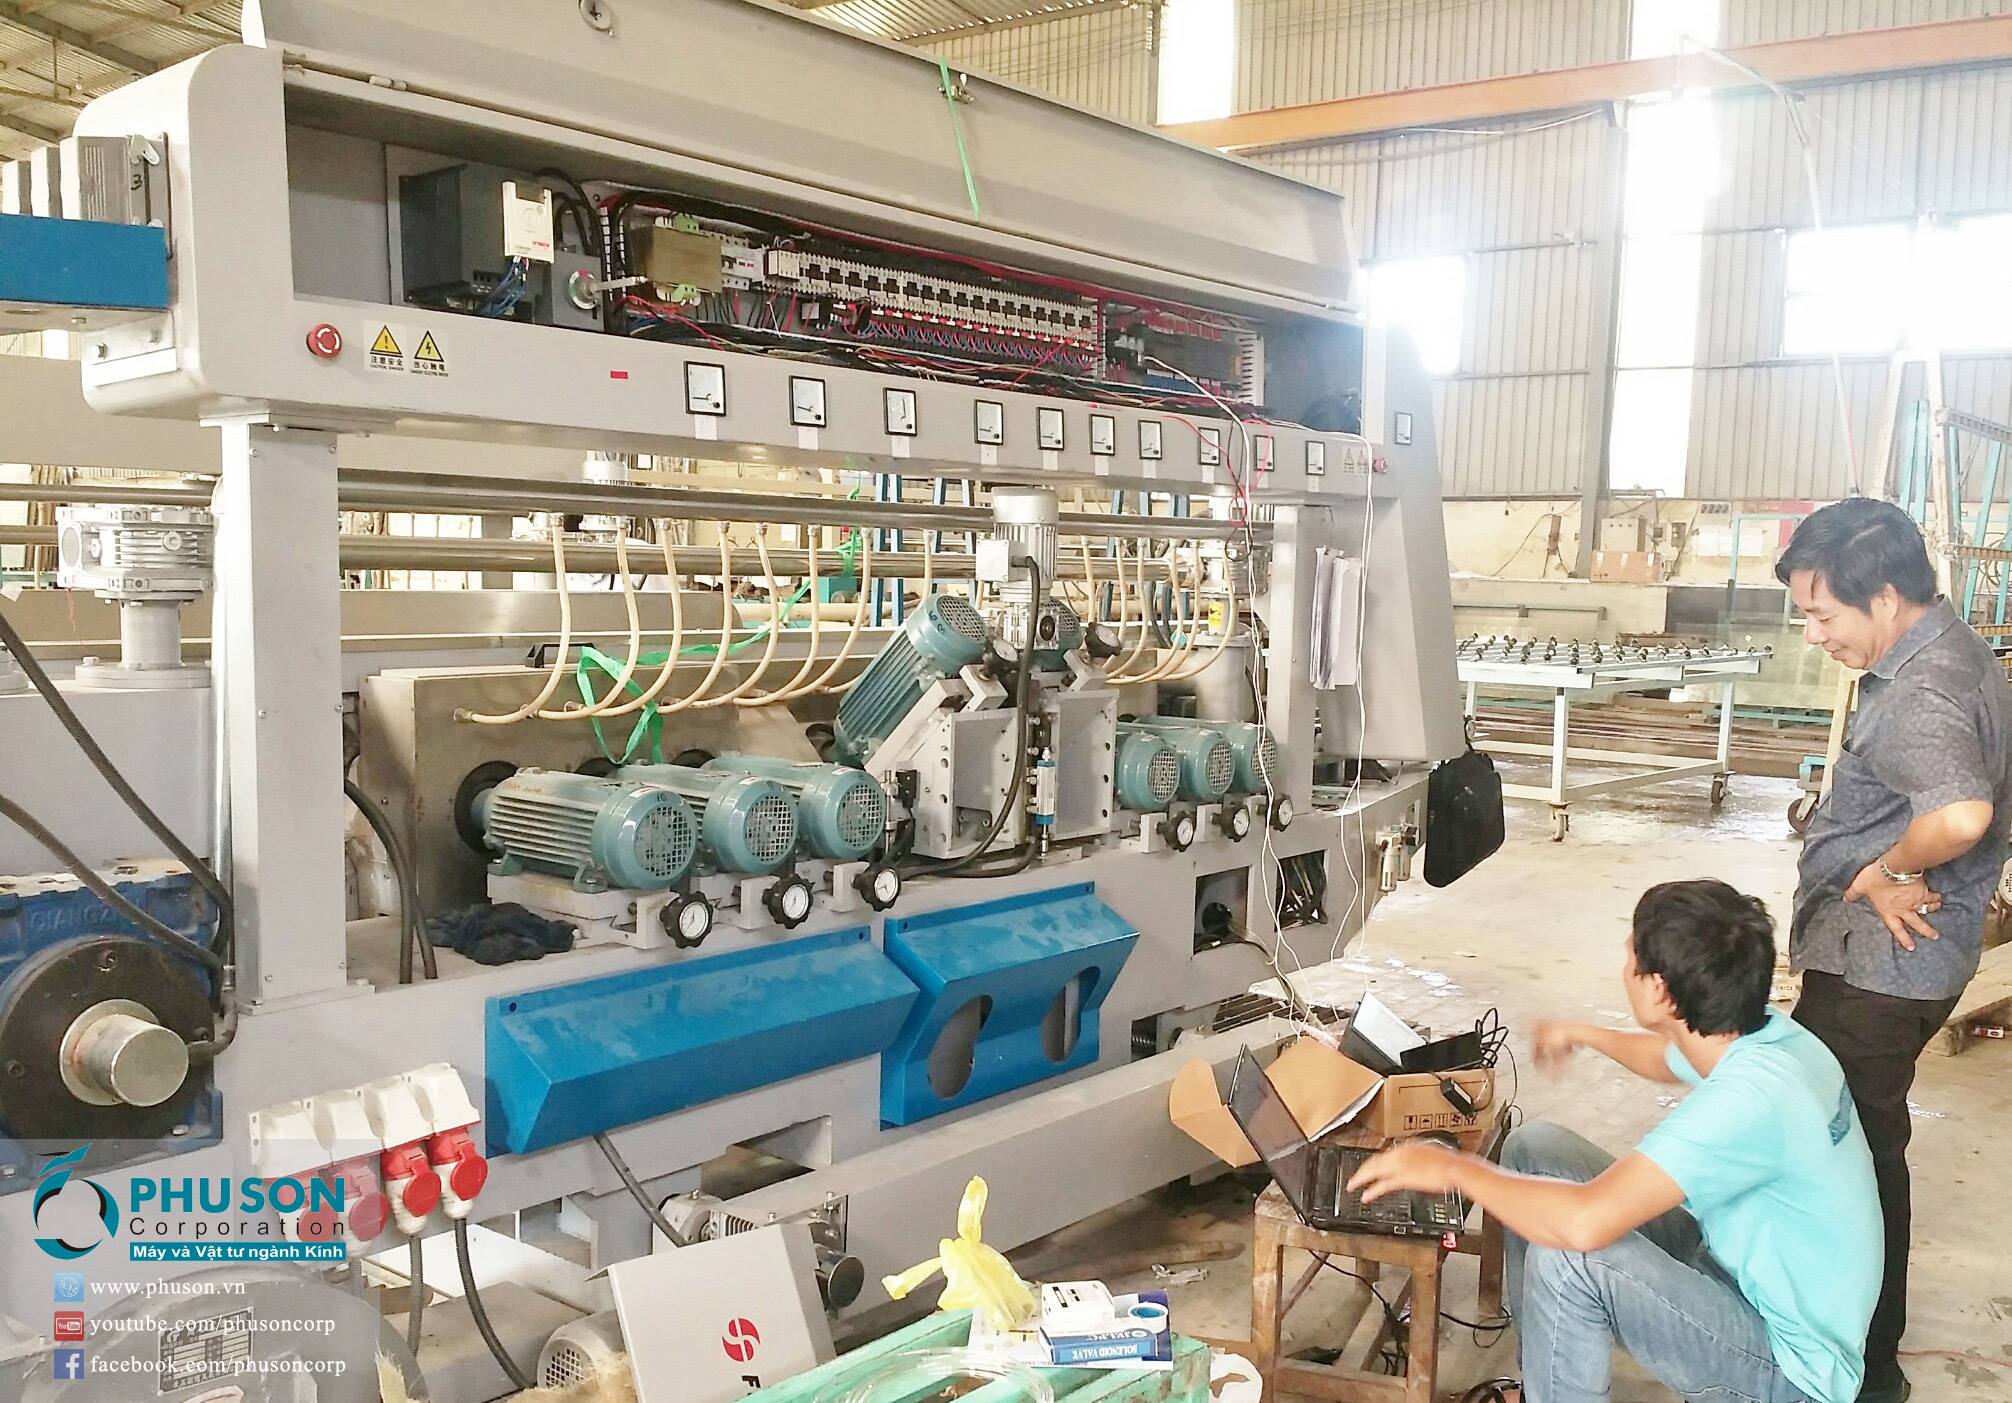 Complete the installation of FUSHAN Double Edging machine at THANH DAT GLASS